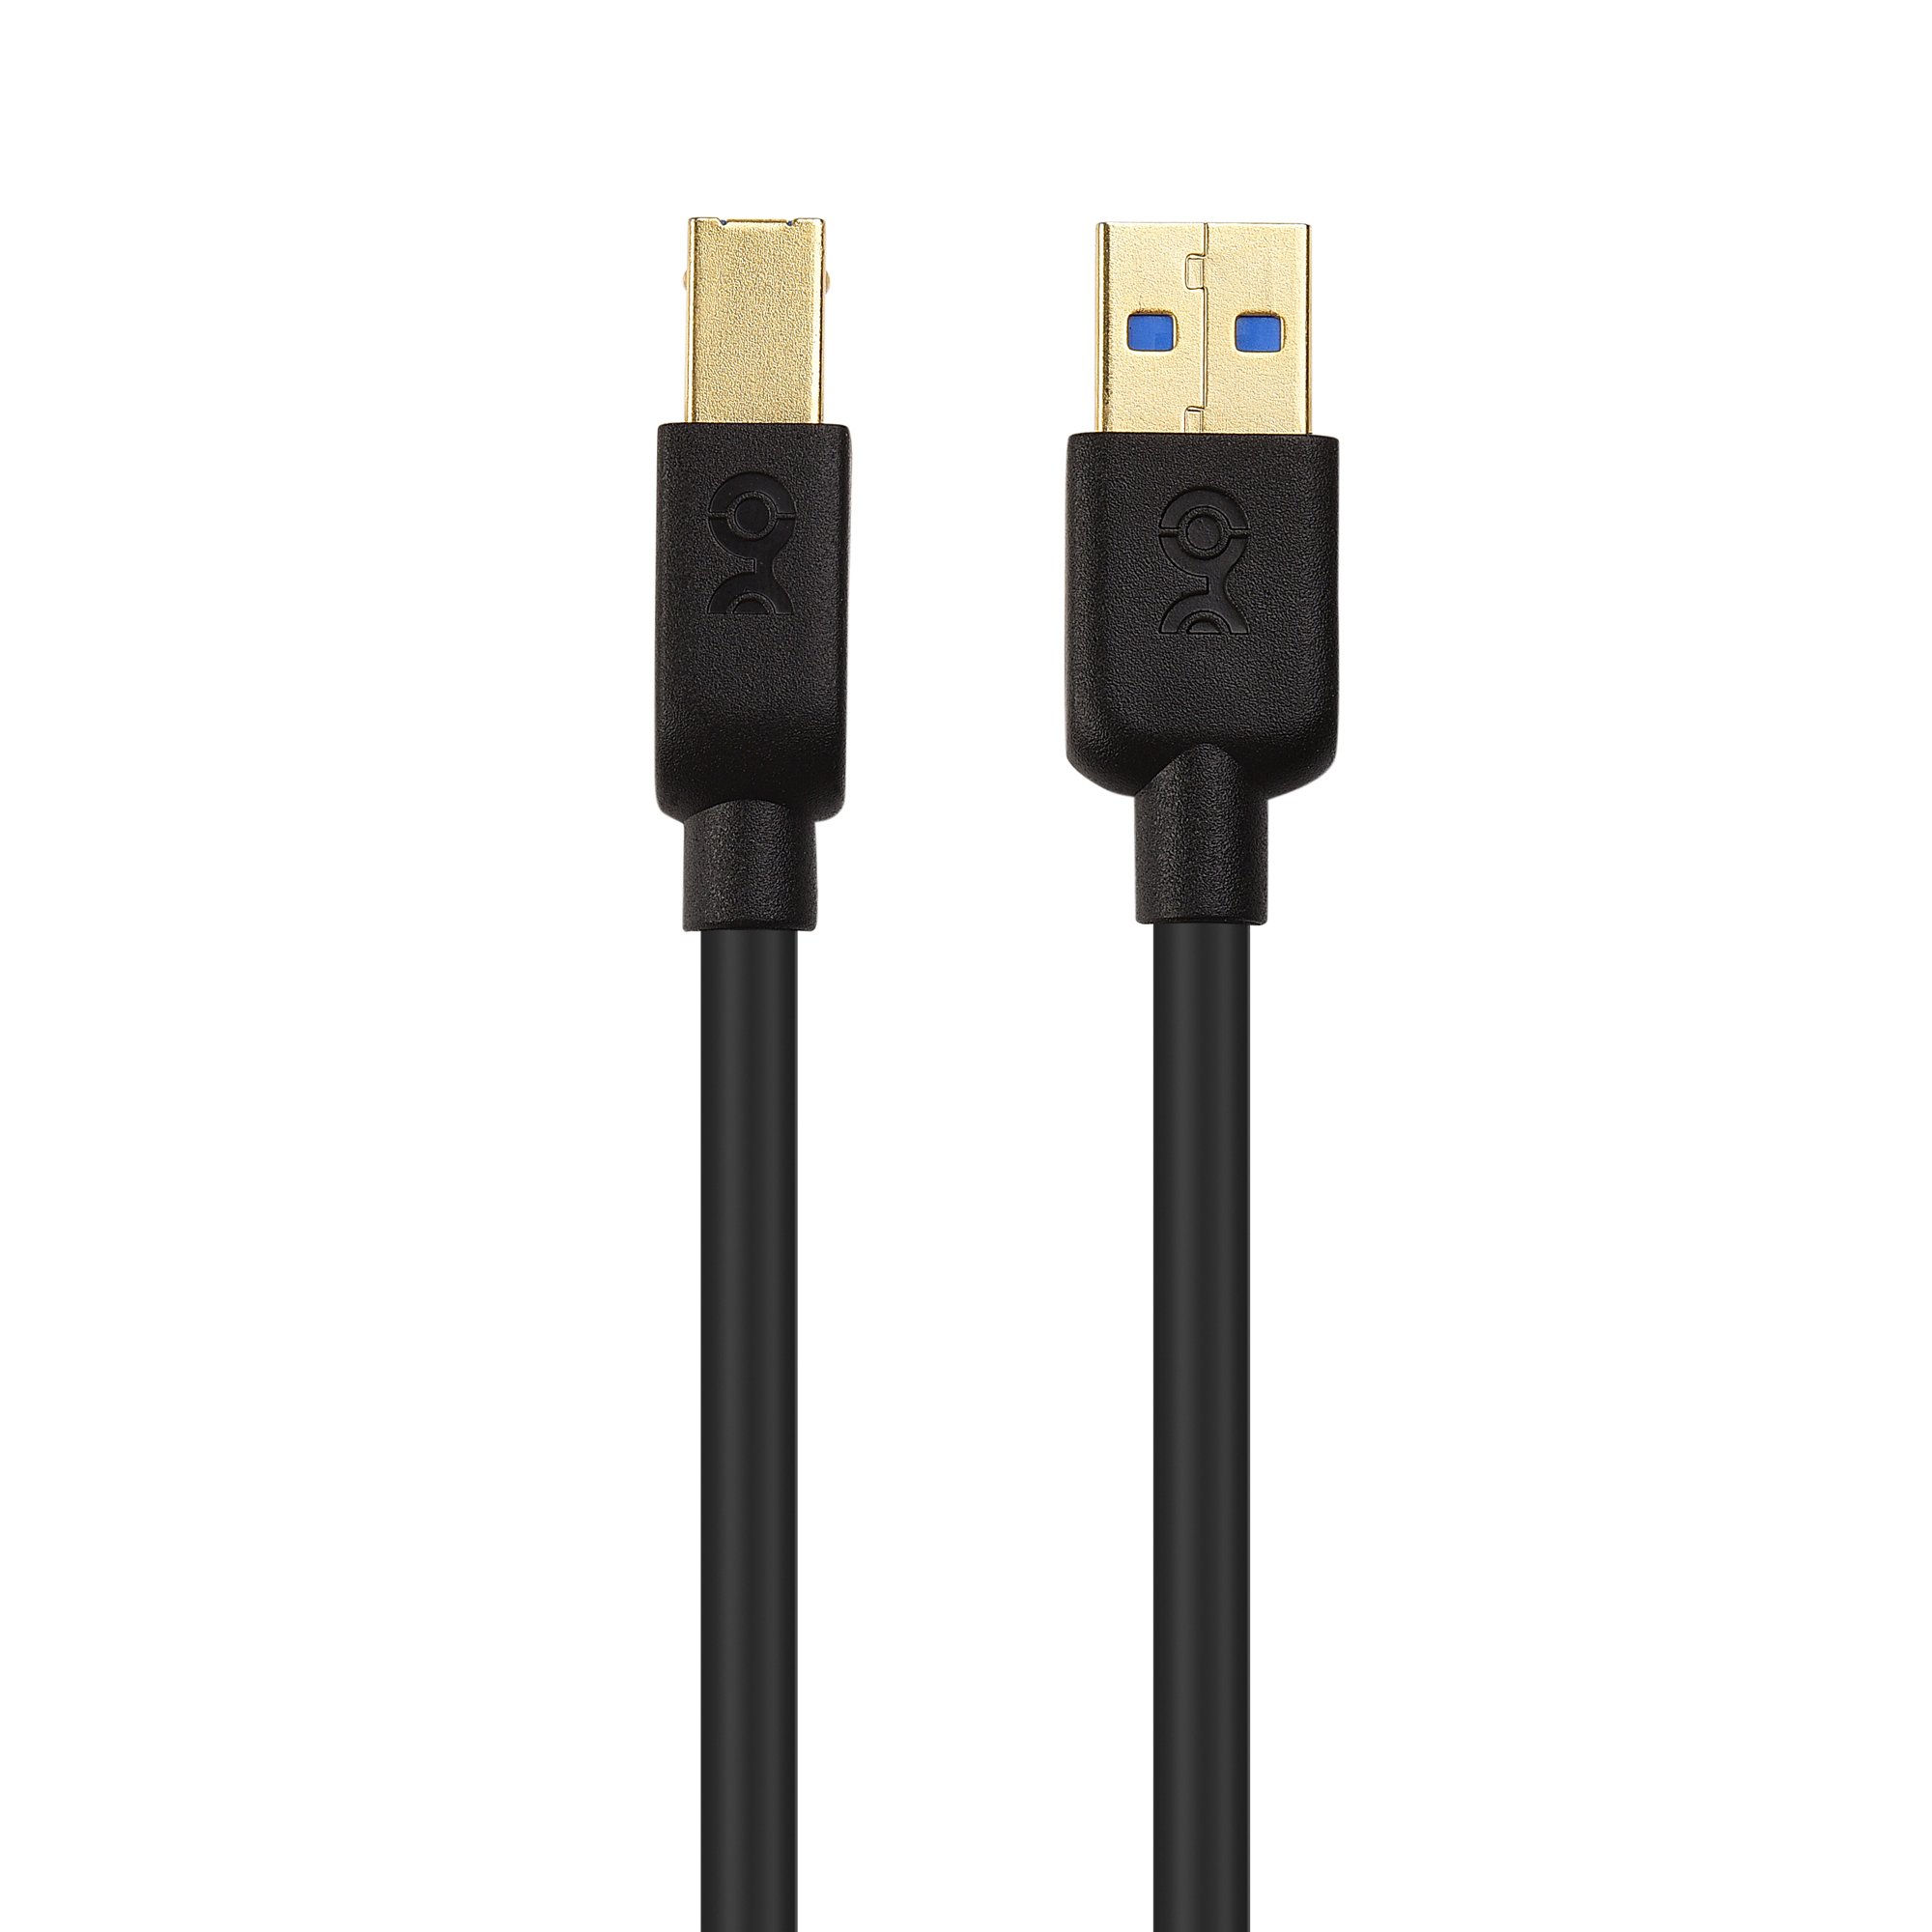 Cable Matters USB 3.0 Cable (USB 3 Cable, USB 3.0 A to B Cable) in Black 6 ft